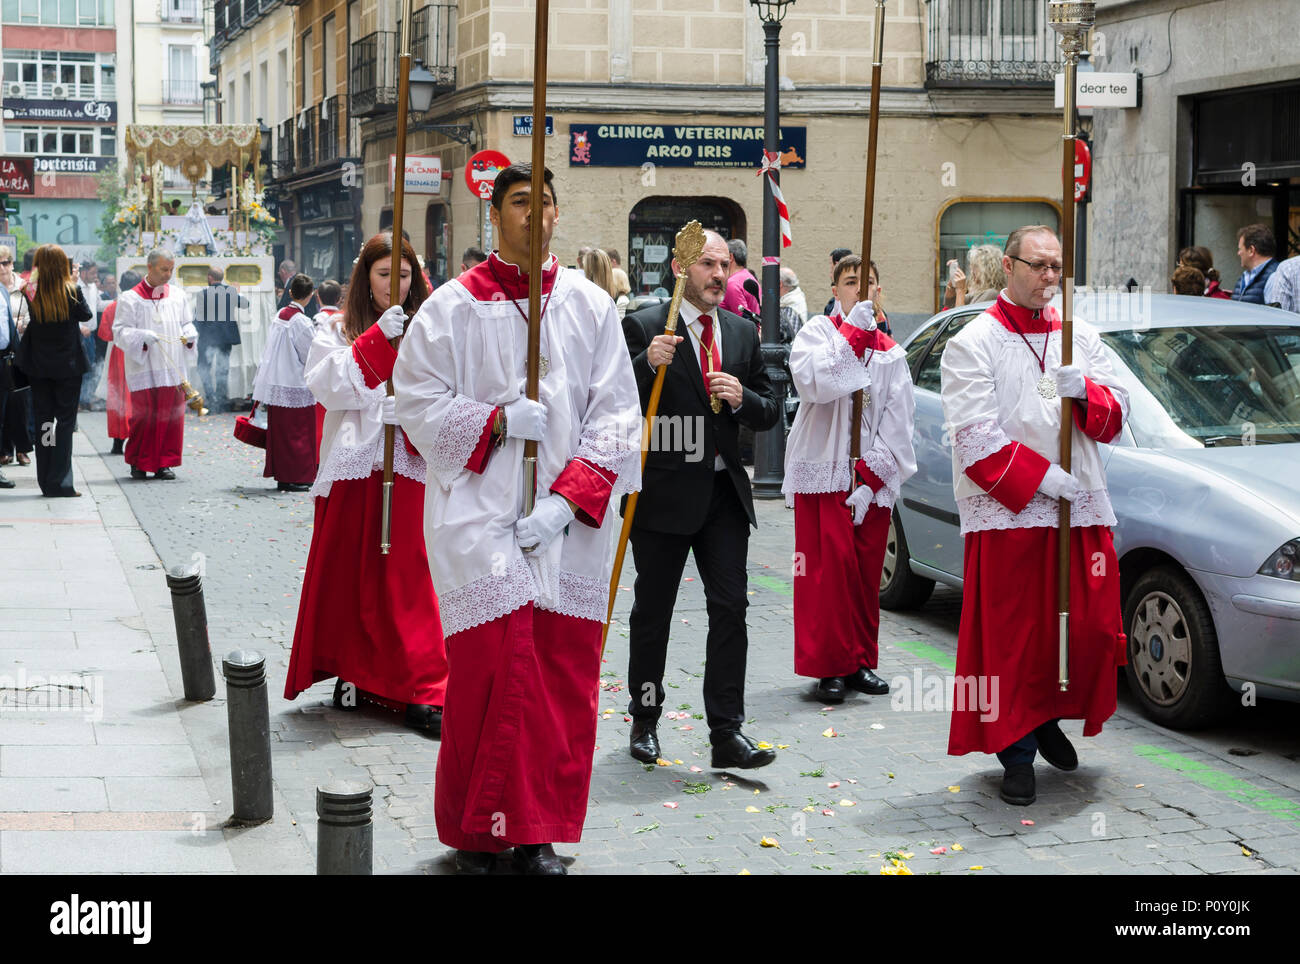 Madrid, Spain, 10 th June, 2018. A view of San Ildefonso procession in Malasaña quarter with priest. Madrid, Spain on 10 th June 2018. Credit: Enrique davó/Alamy Live News. Stock Photo